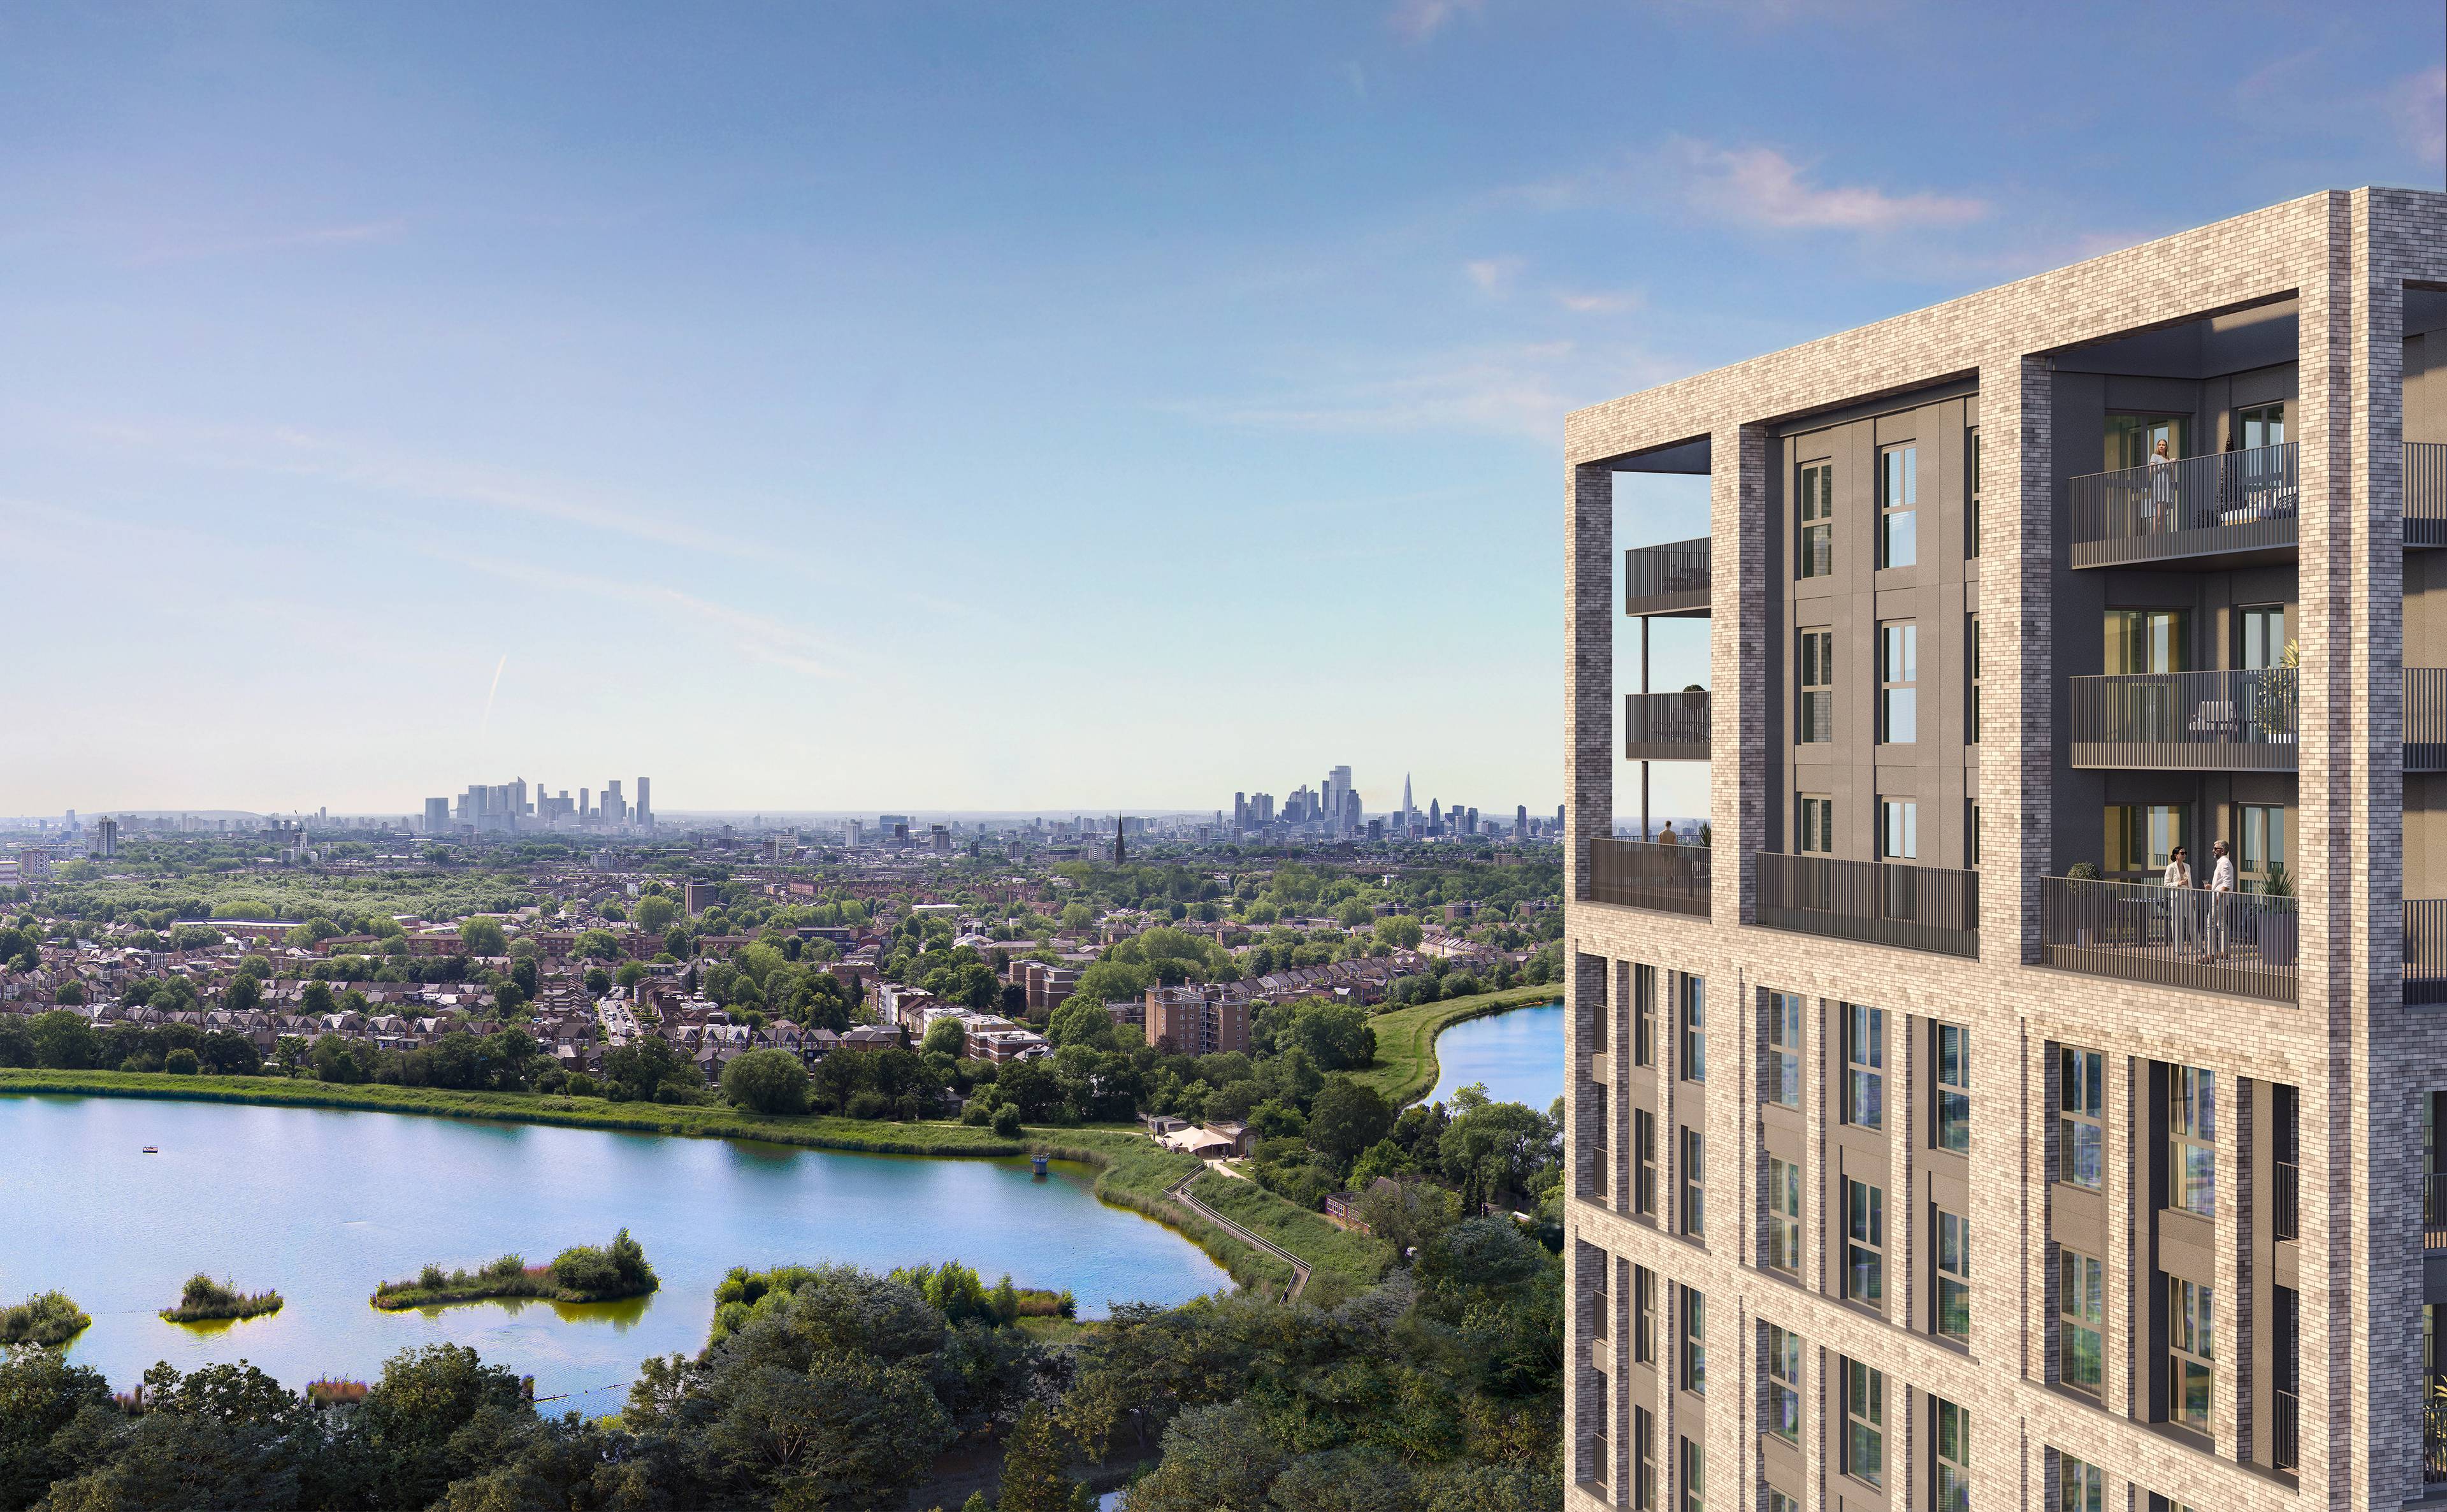 Hidden Oasis, 10 minutes from Central London -  Luxury 1-Bedroom Apartment in a Stunning New Development Surrounded by Nature - Fourteenth Floor - Park and Reservoir Views